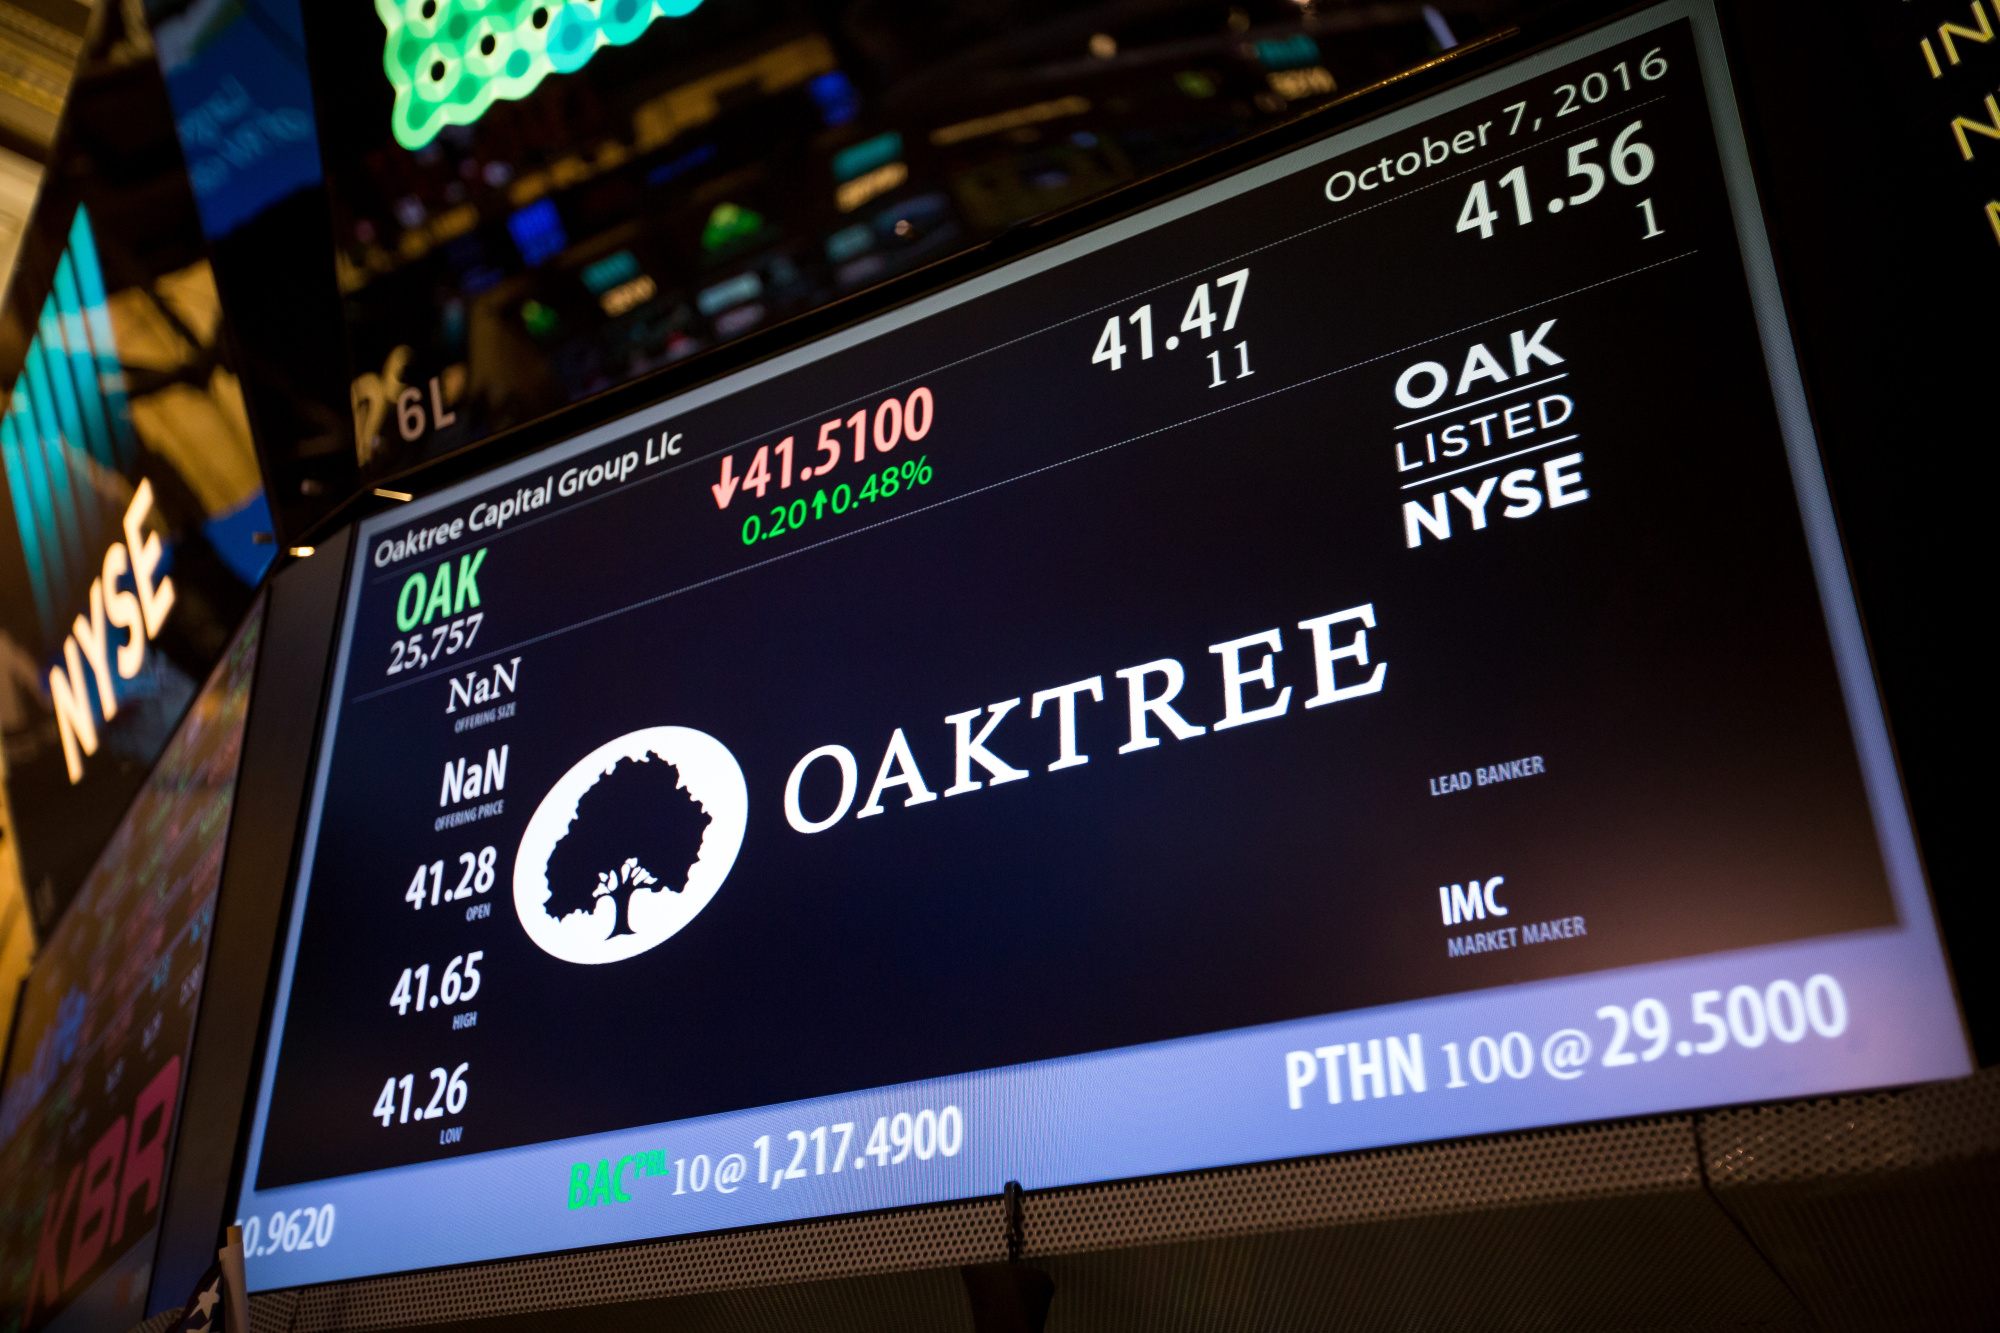 Reef and Oaktree’s new business will partly target areas experiencing population booms after people left cities because of the pandemic.